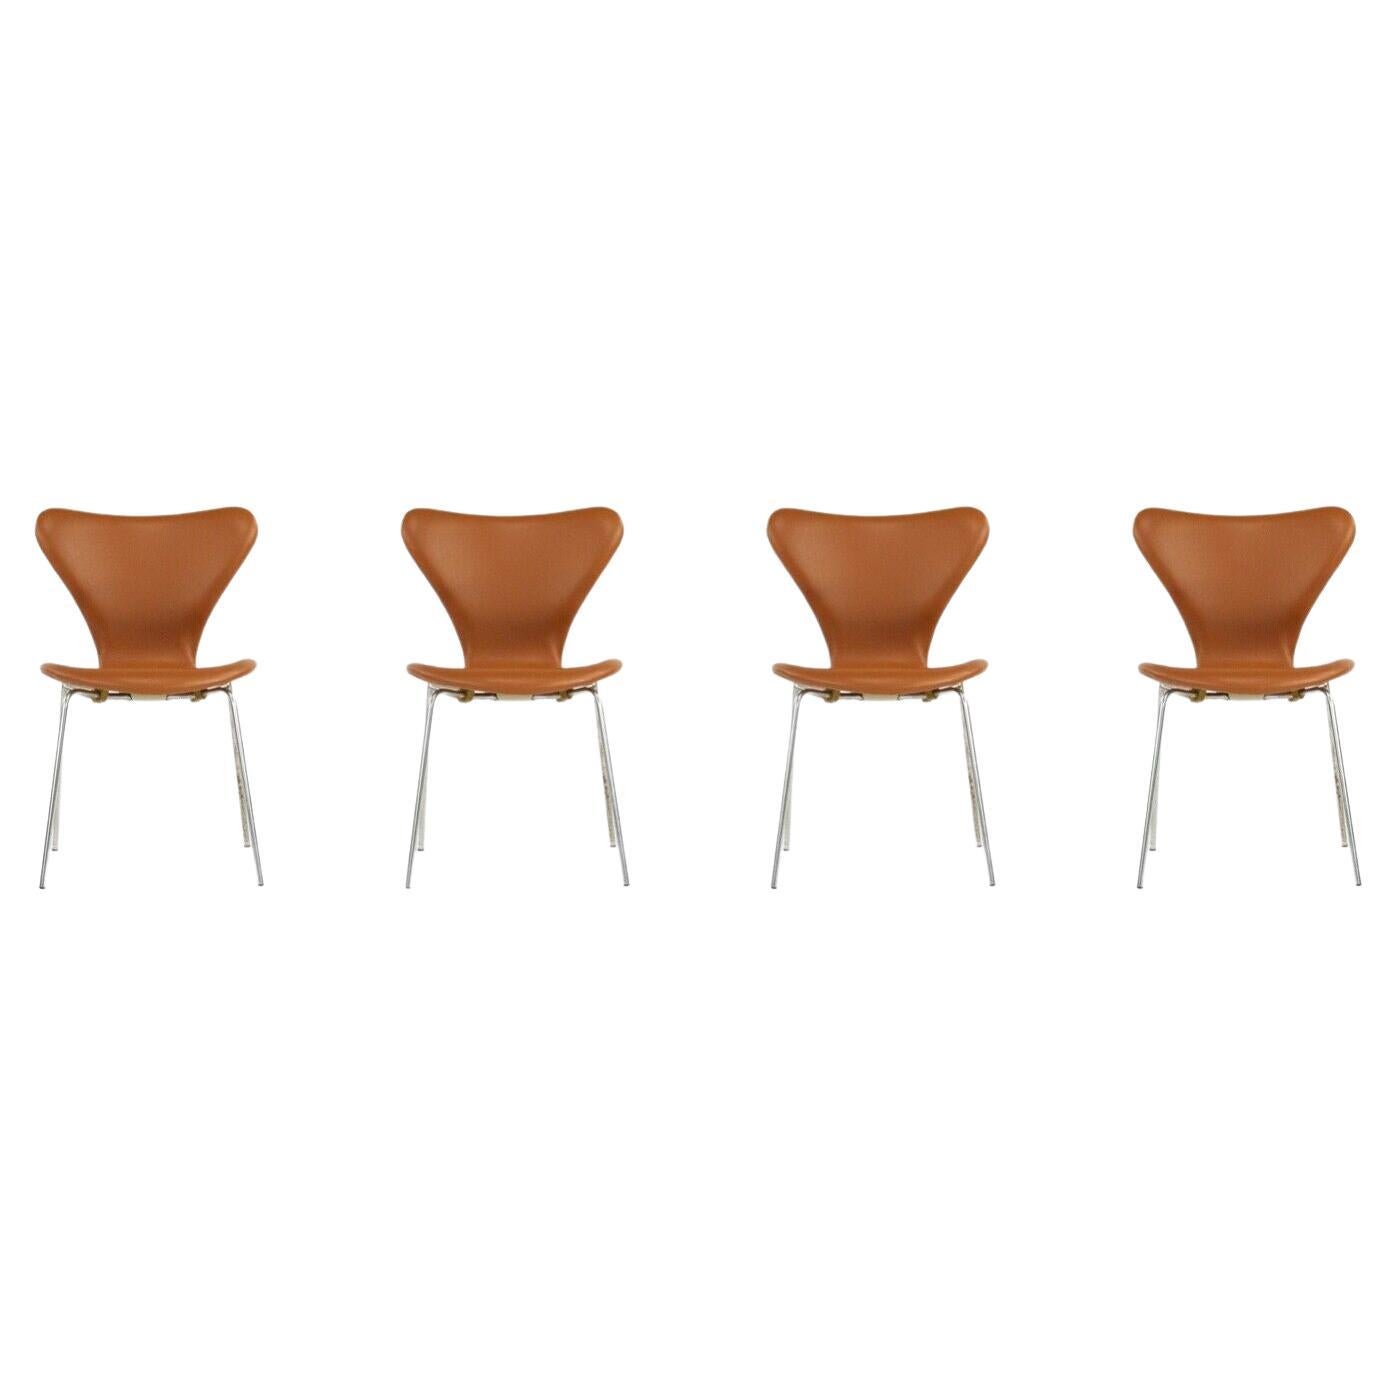 Set of 4x 1969 Arne Jacobsen Fritz Hansen Series 7 Handstiched Leather Chairs For Sale